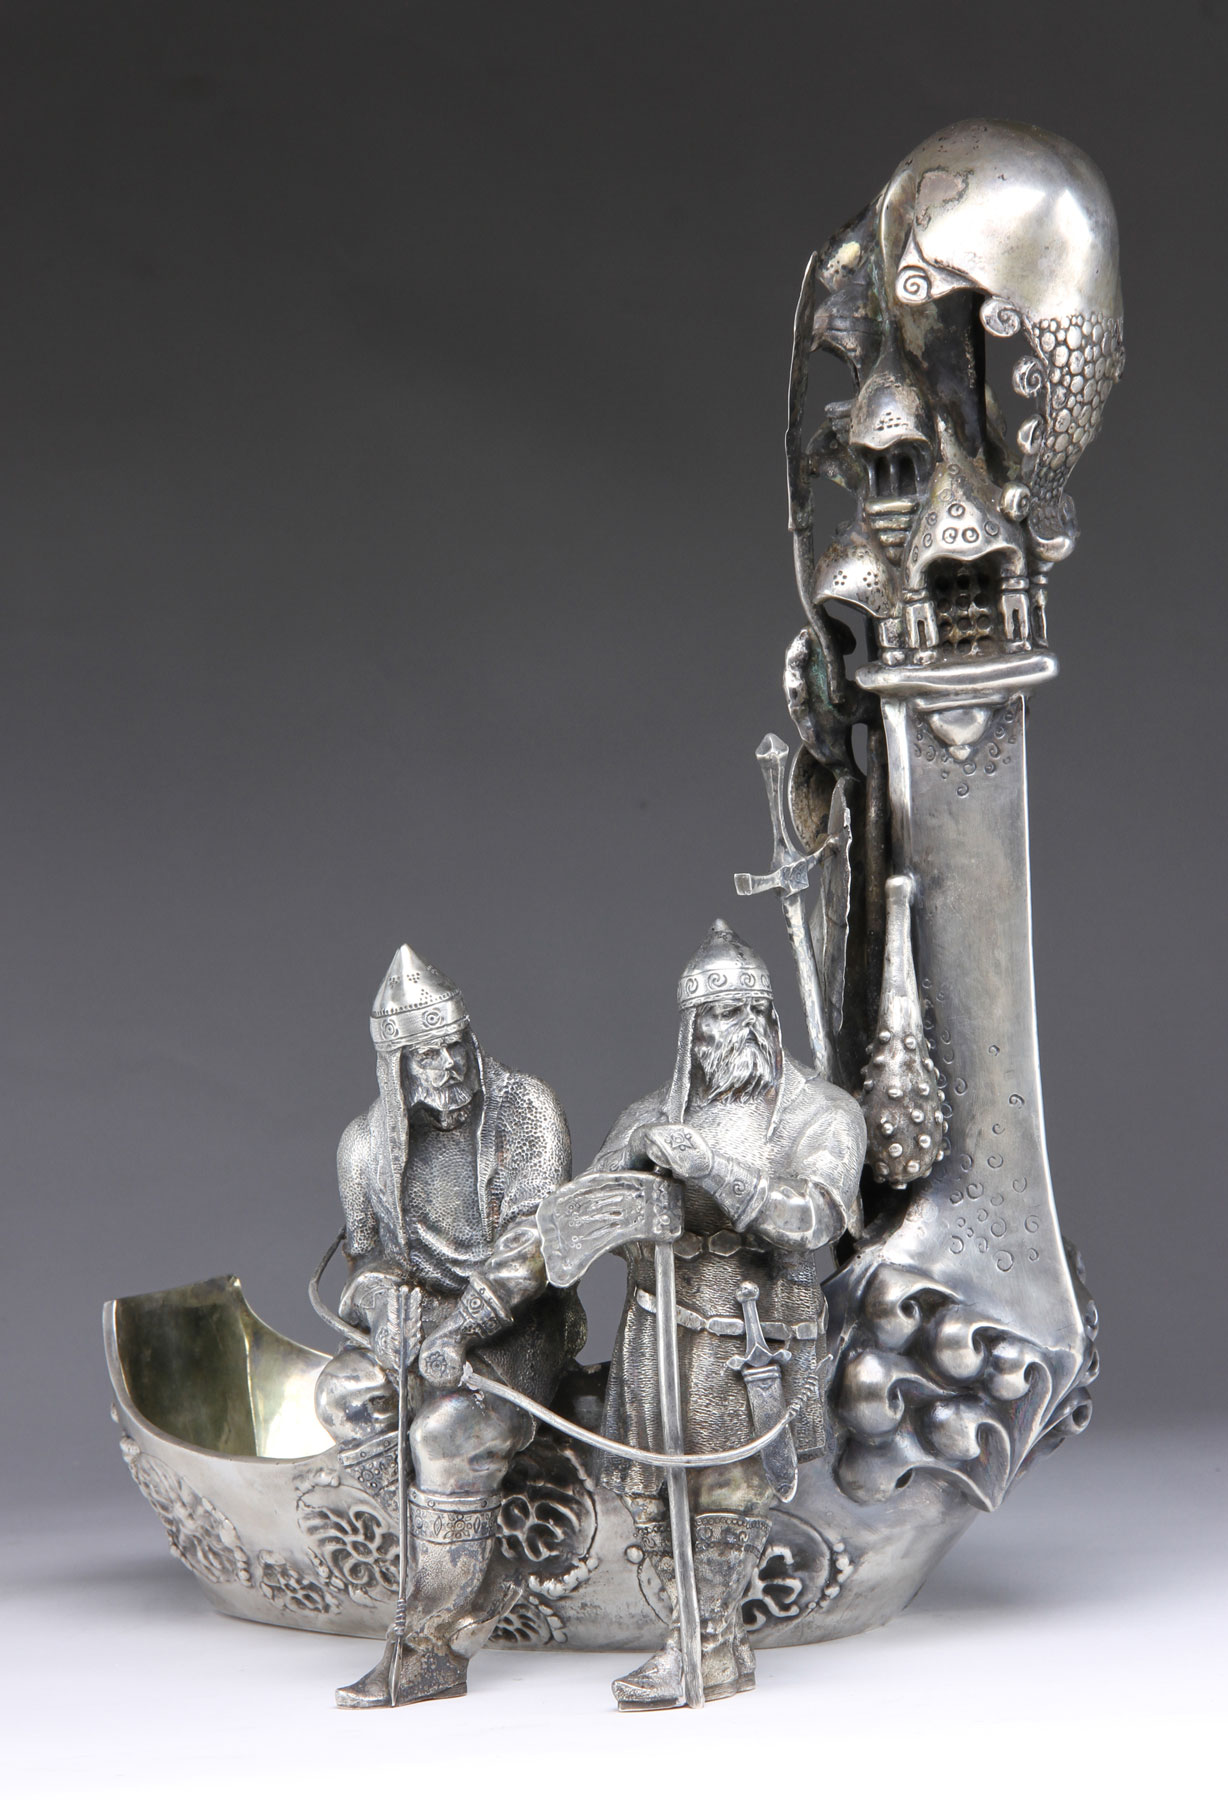 19th century Russian solid silver kovsh, showing two Vikings with armor, marked "84" in Cyrillic for .875 silver, signed on base "P. Ovchinkova"